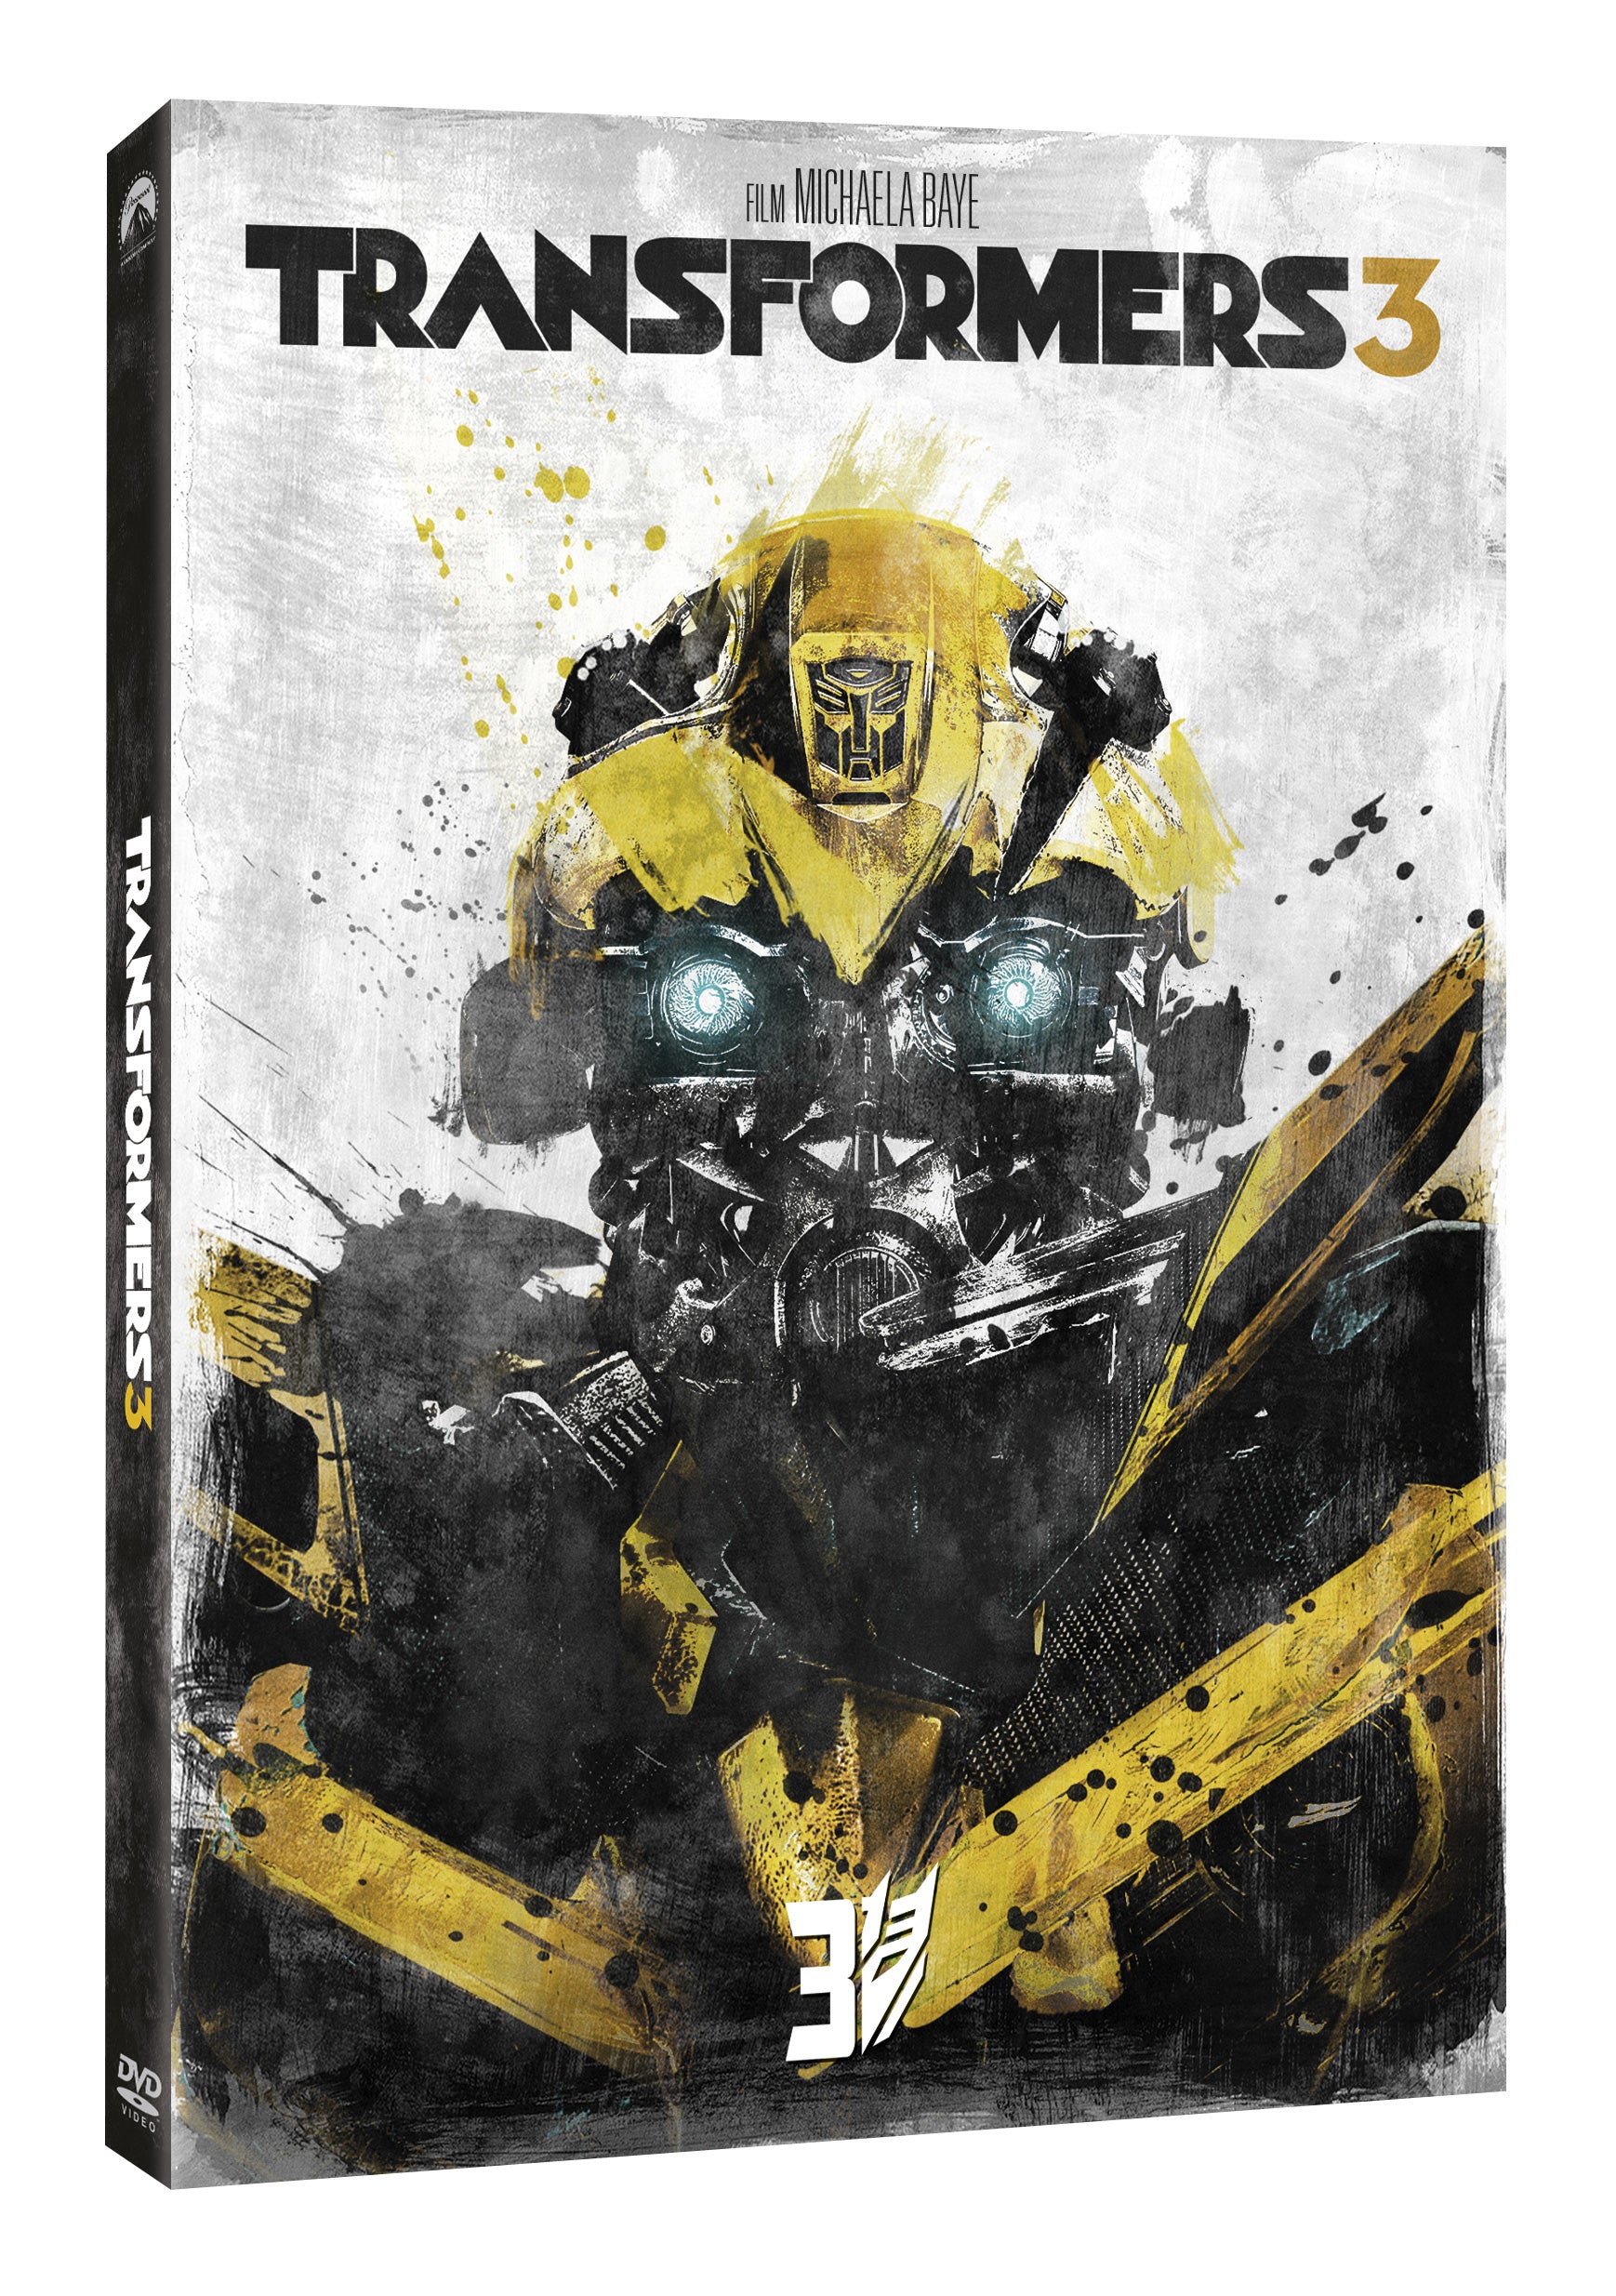 Transformers 3. DVD - Edice 10 let / Transformers: The Dark of the Moon